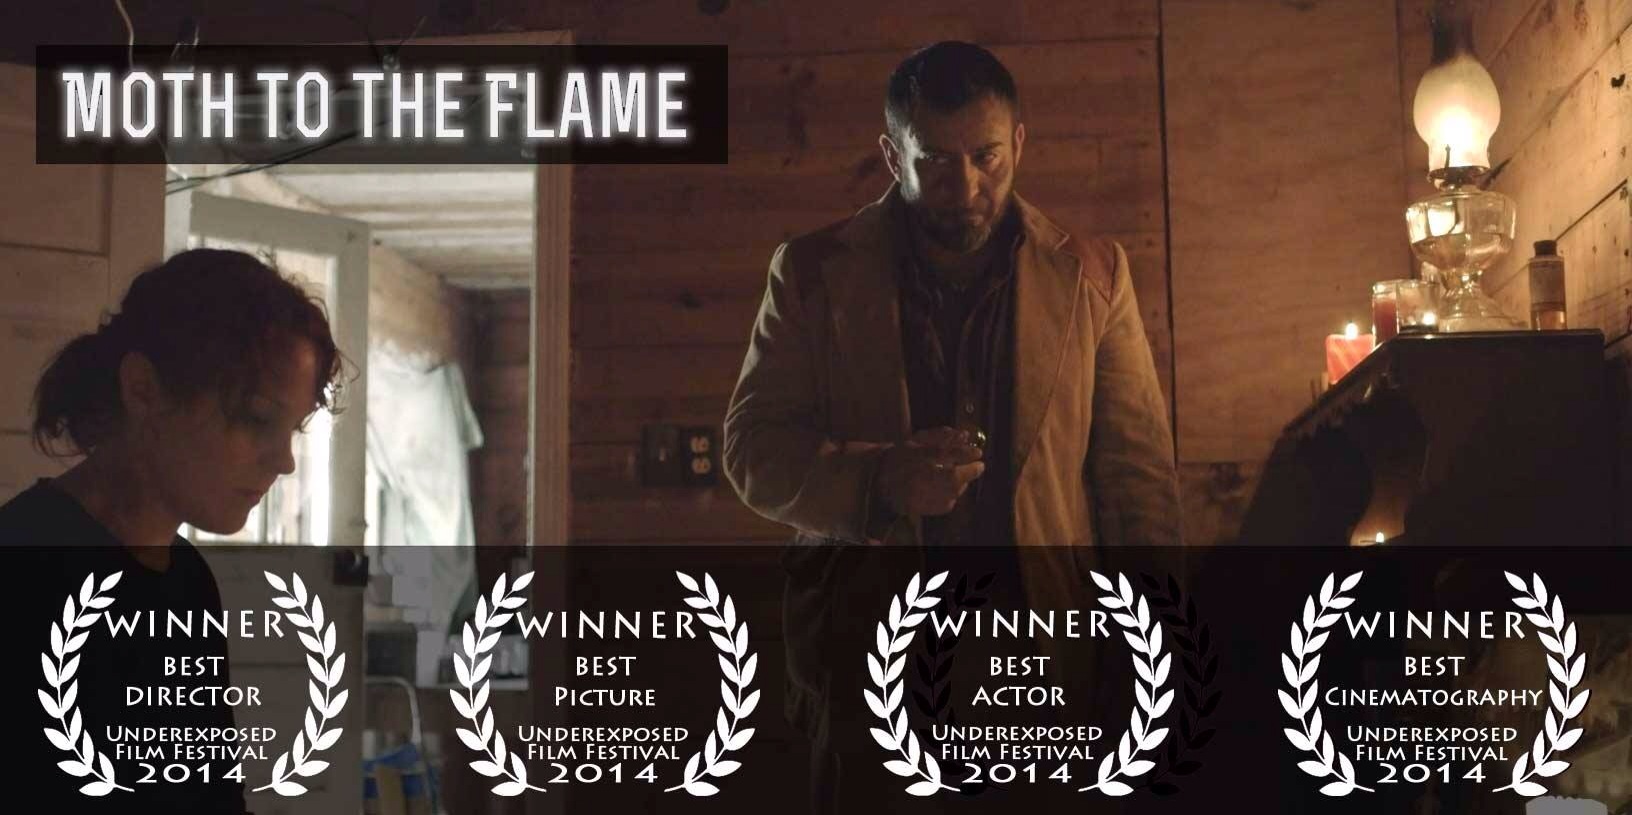 Moth To The Flame wins Big At the UTA Underexposed Film Festival